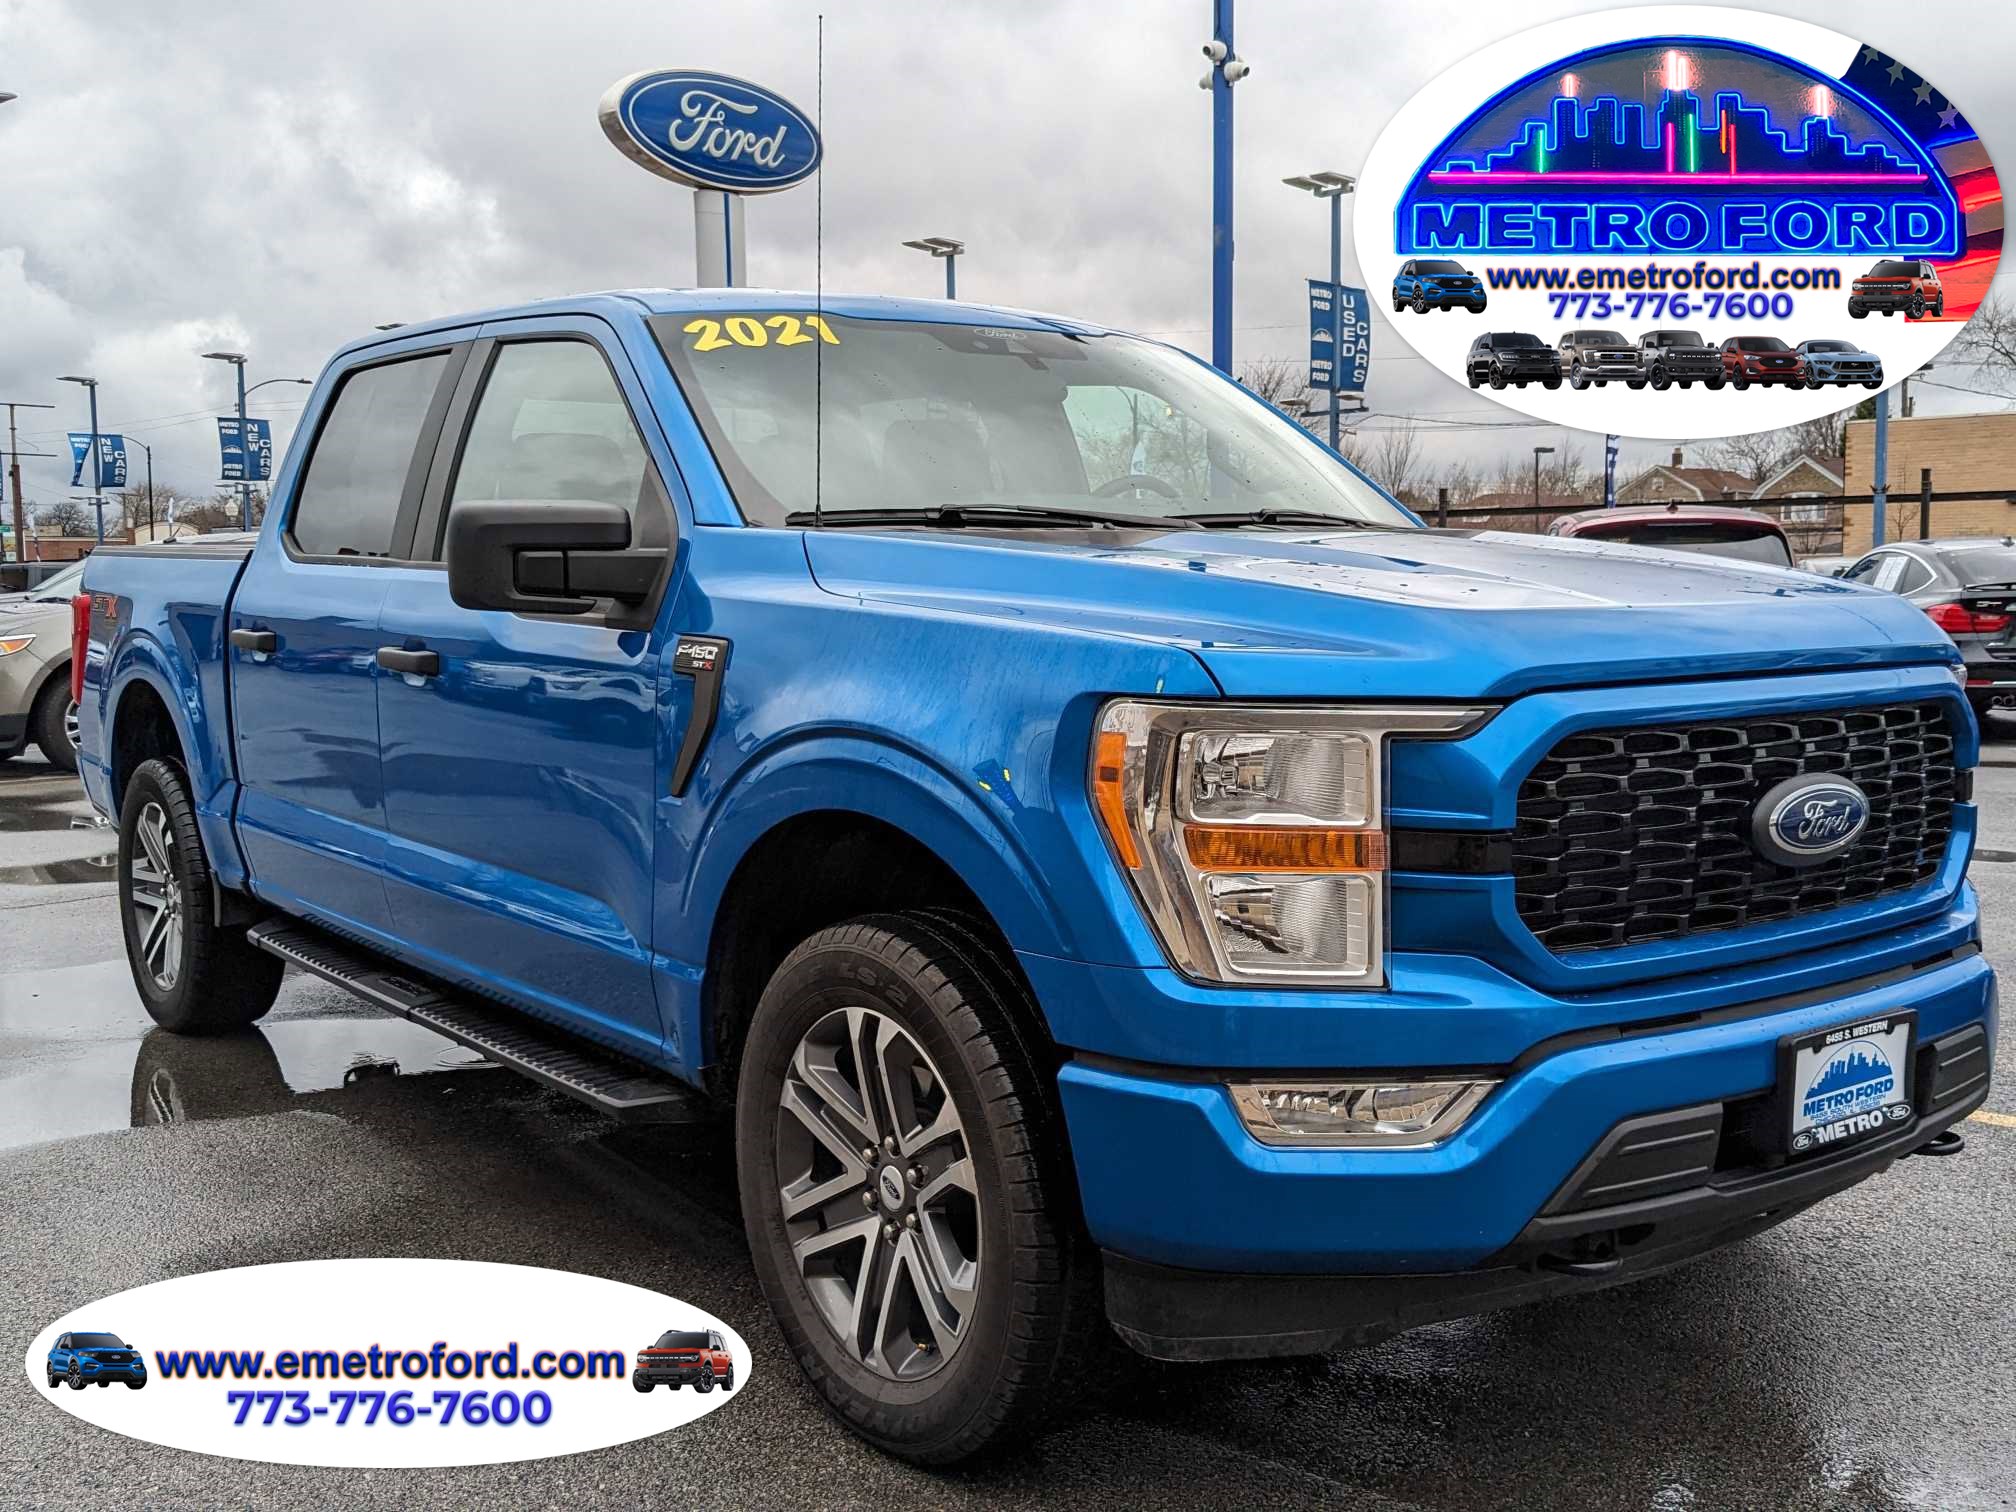 2021 Ford F-150 XL for Sale in Chicago 60636 | Metro Ford Chicago's Premier Pickup Truck